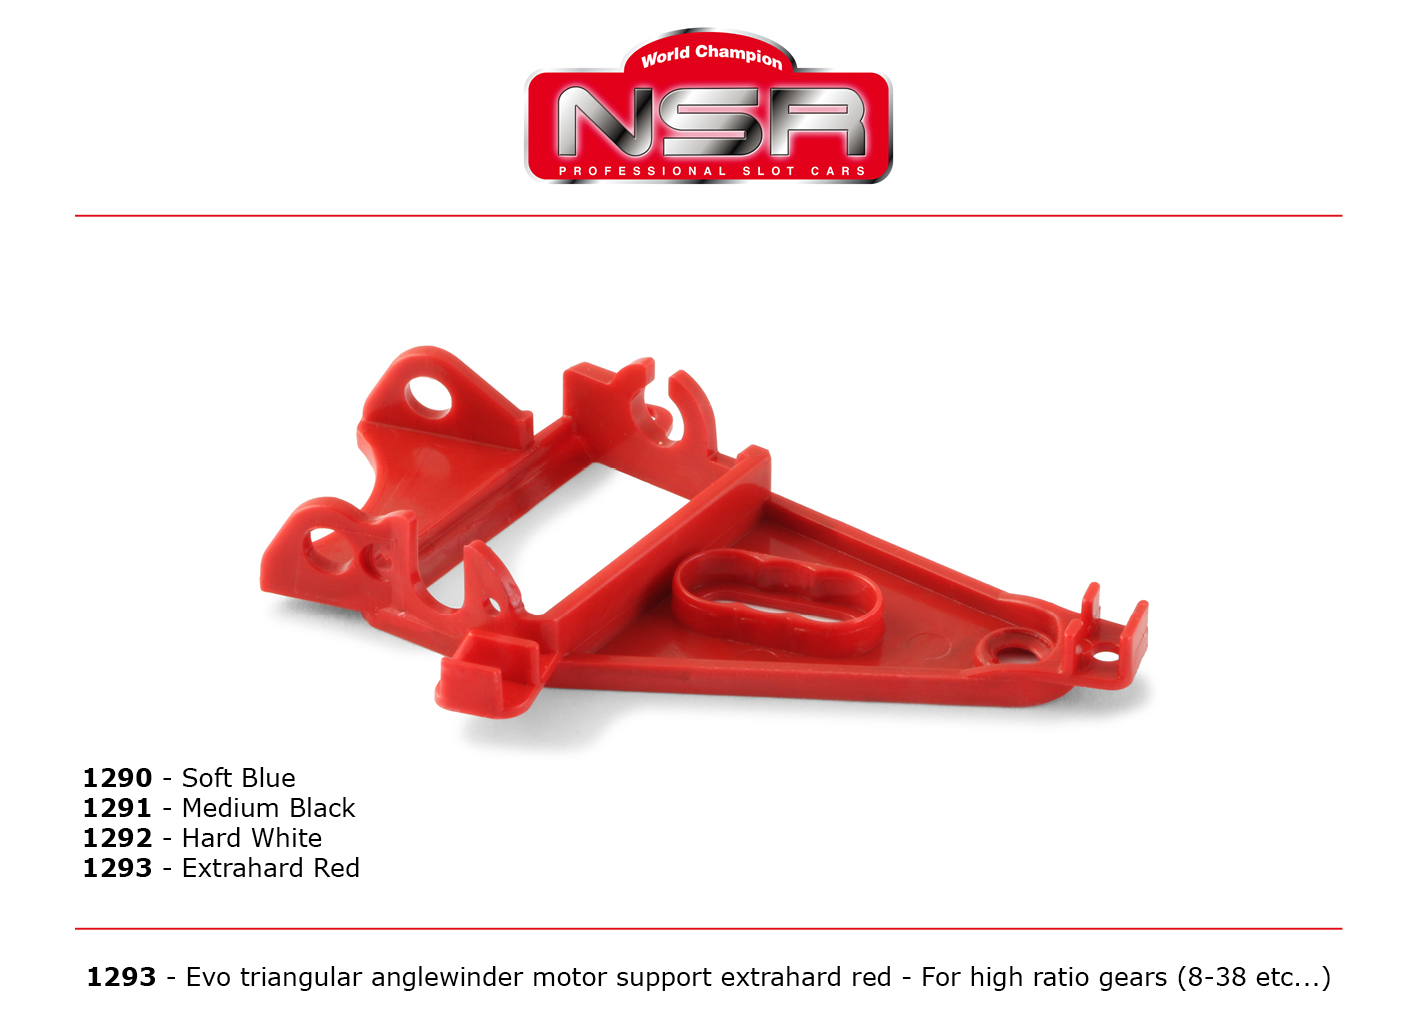 NSR - Anglewinder - For High Gear Ratio - EXTRA HARD (red)